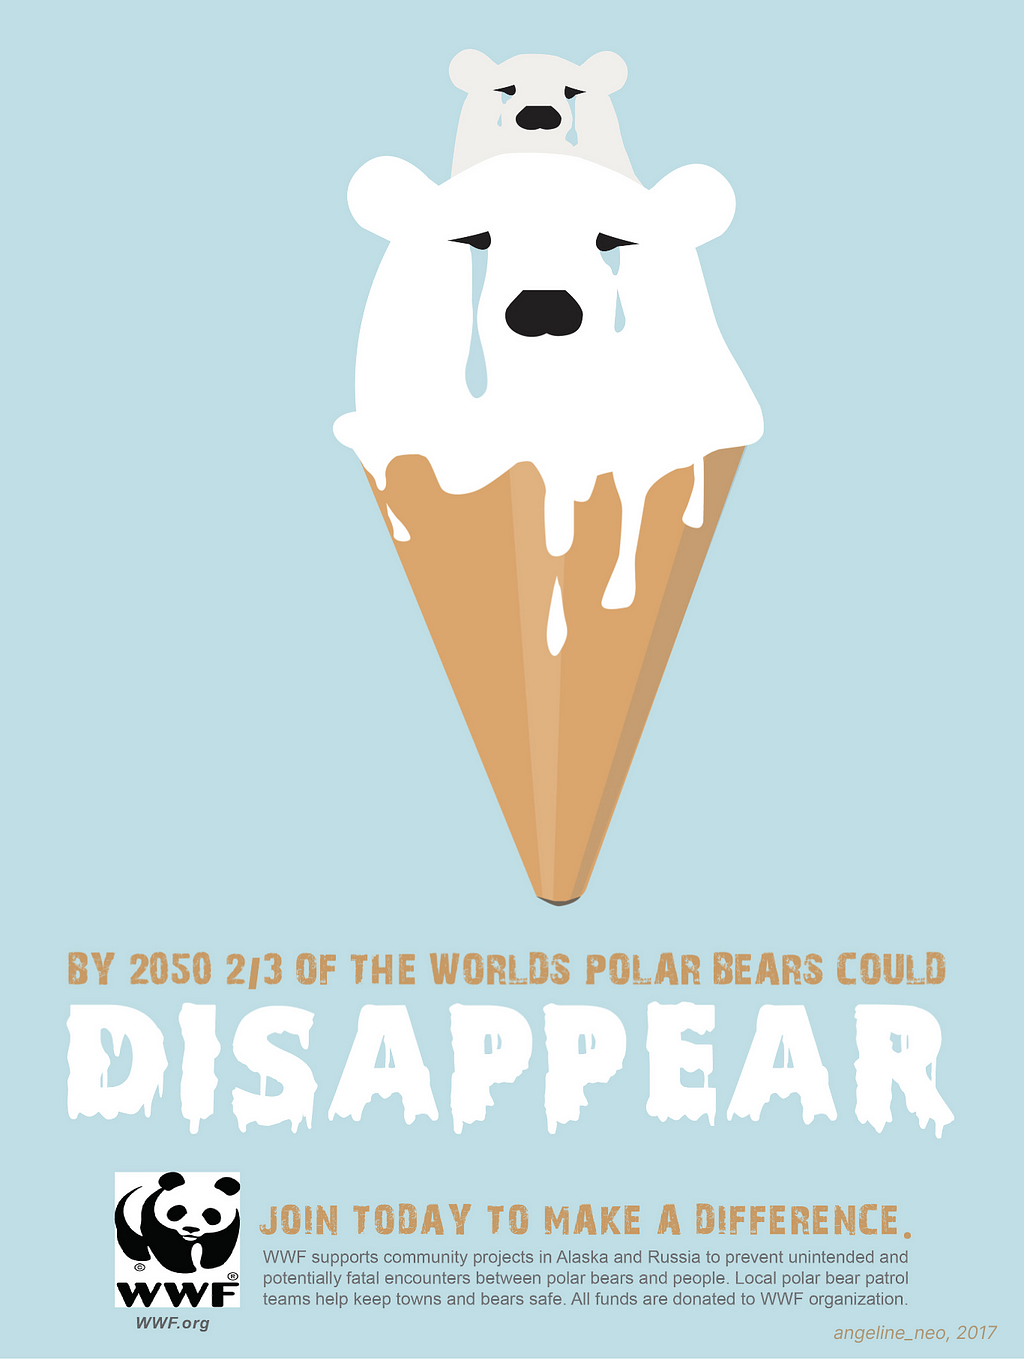 A poster wth polar bears melting in an ice-cream concept, alarming about global warming